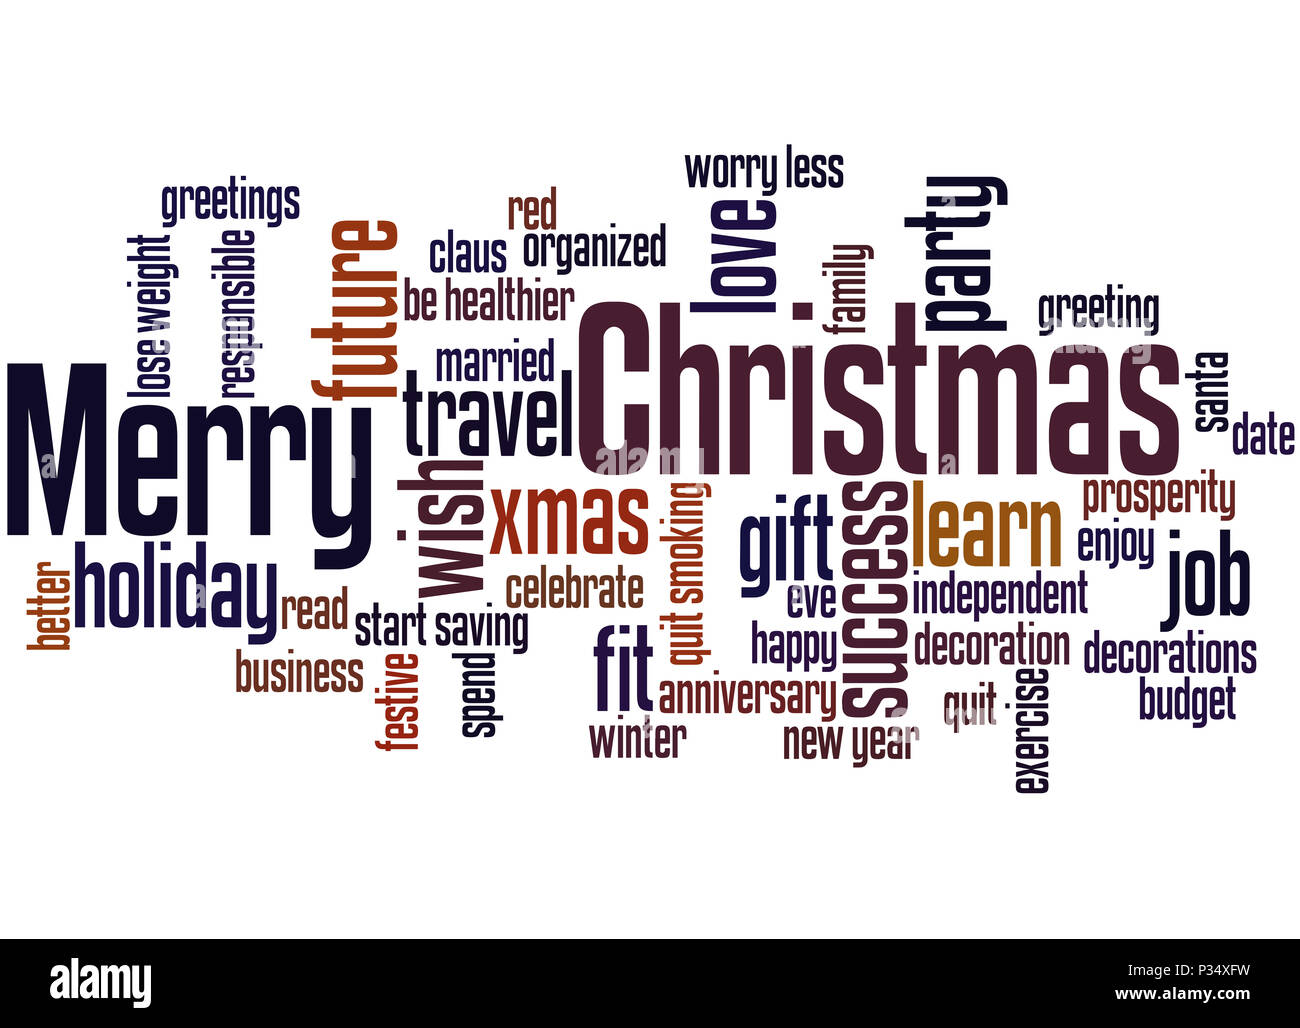 Merry Christmas word cloud concept on white background Stock Image